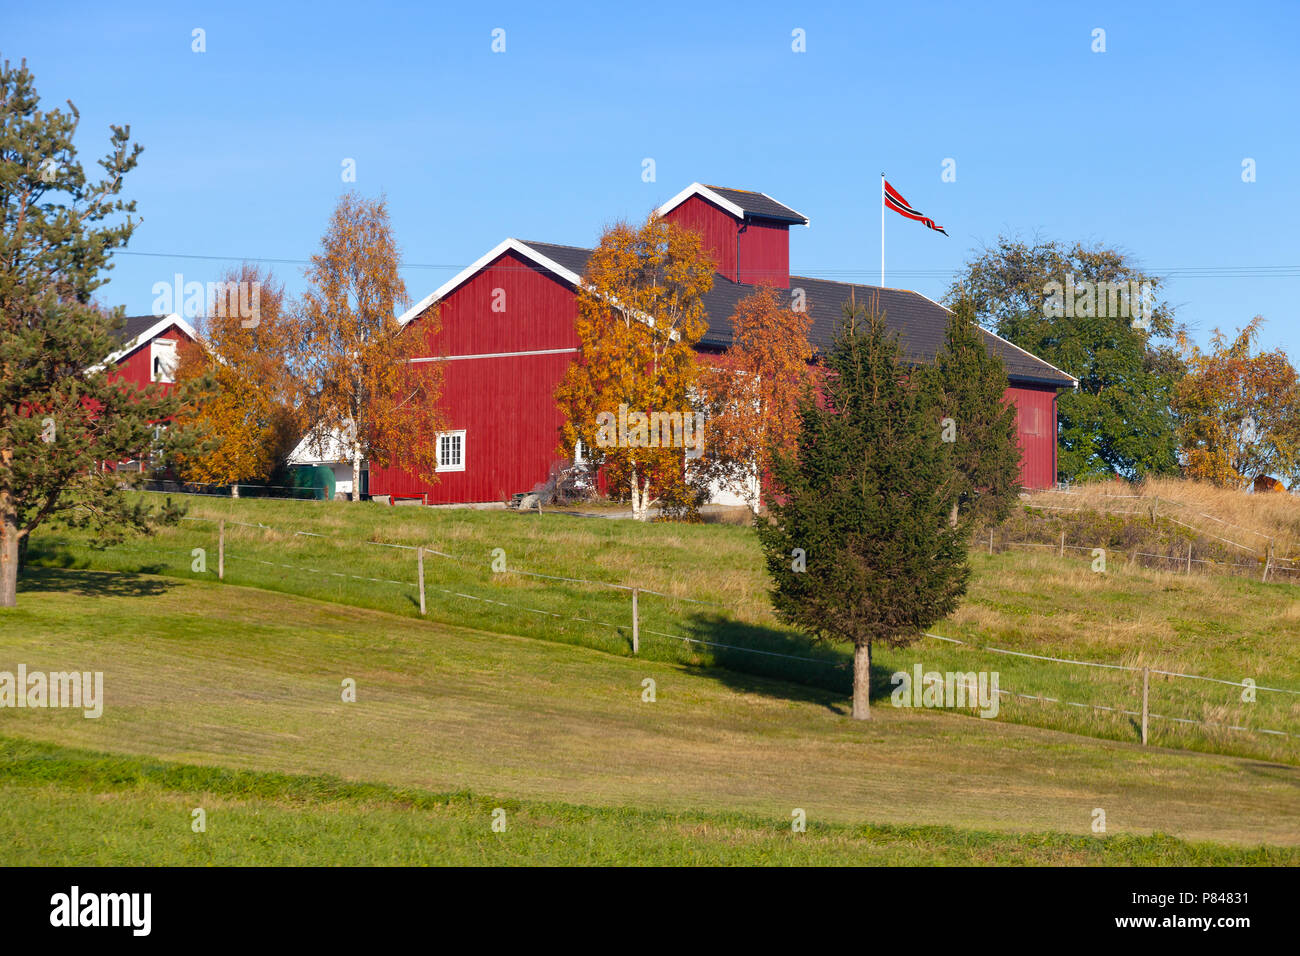 Rural Norwegian landscape with red wooden barn and flag waving on a  flagpole. Trondheim region Stock Photo - Alamy